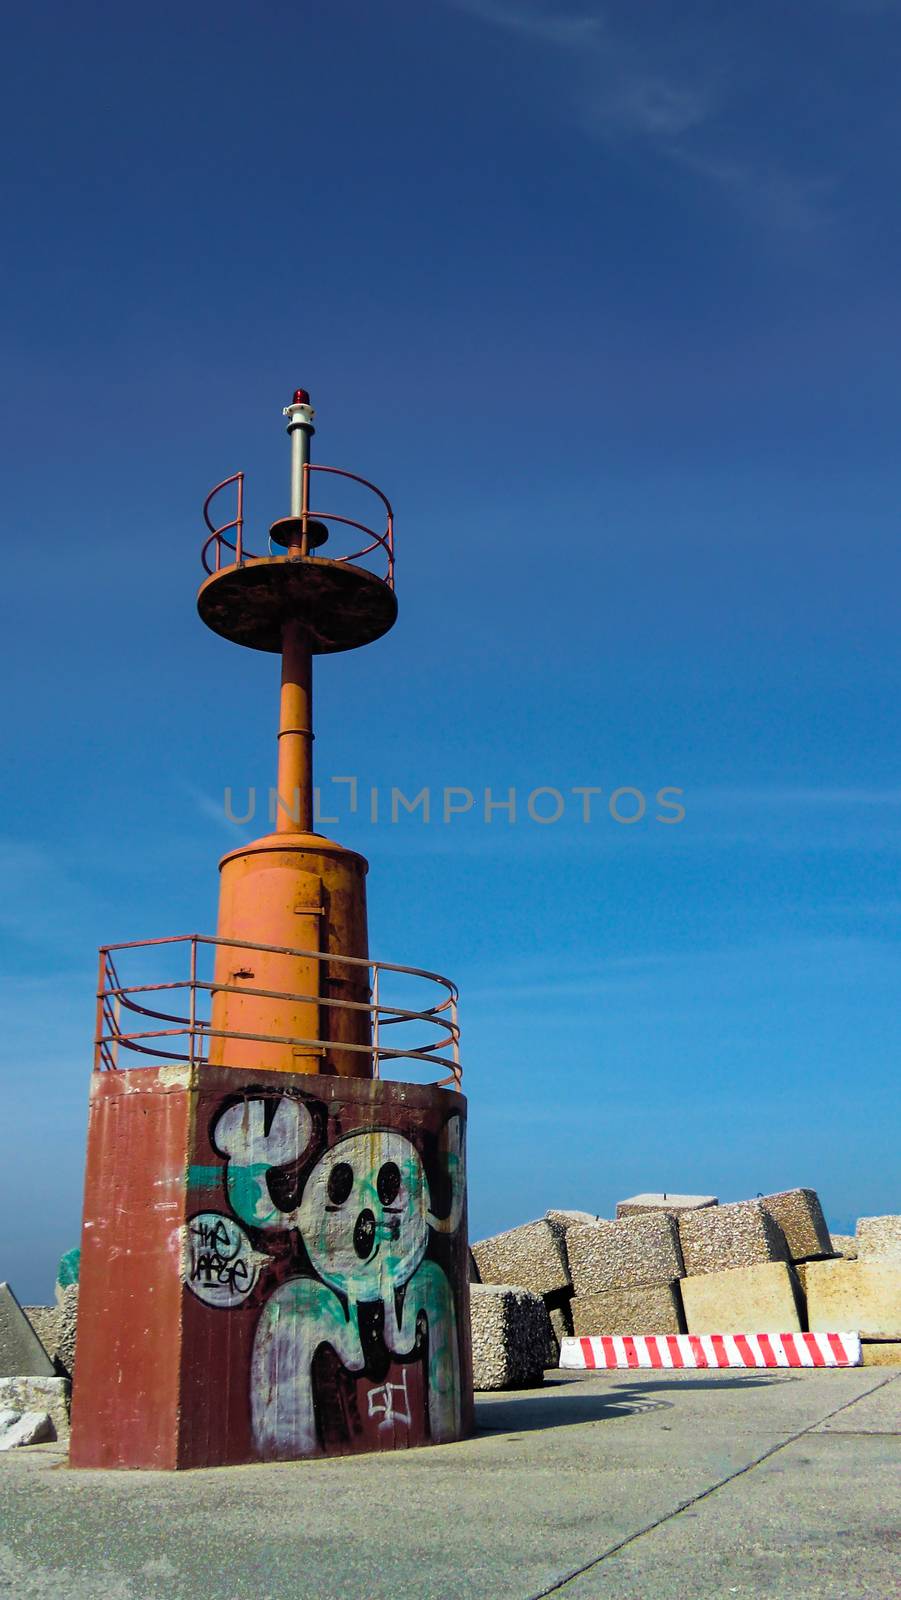 The lighthouse of dreams and desires by pippocarlot